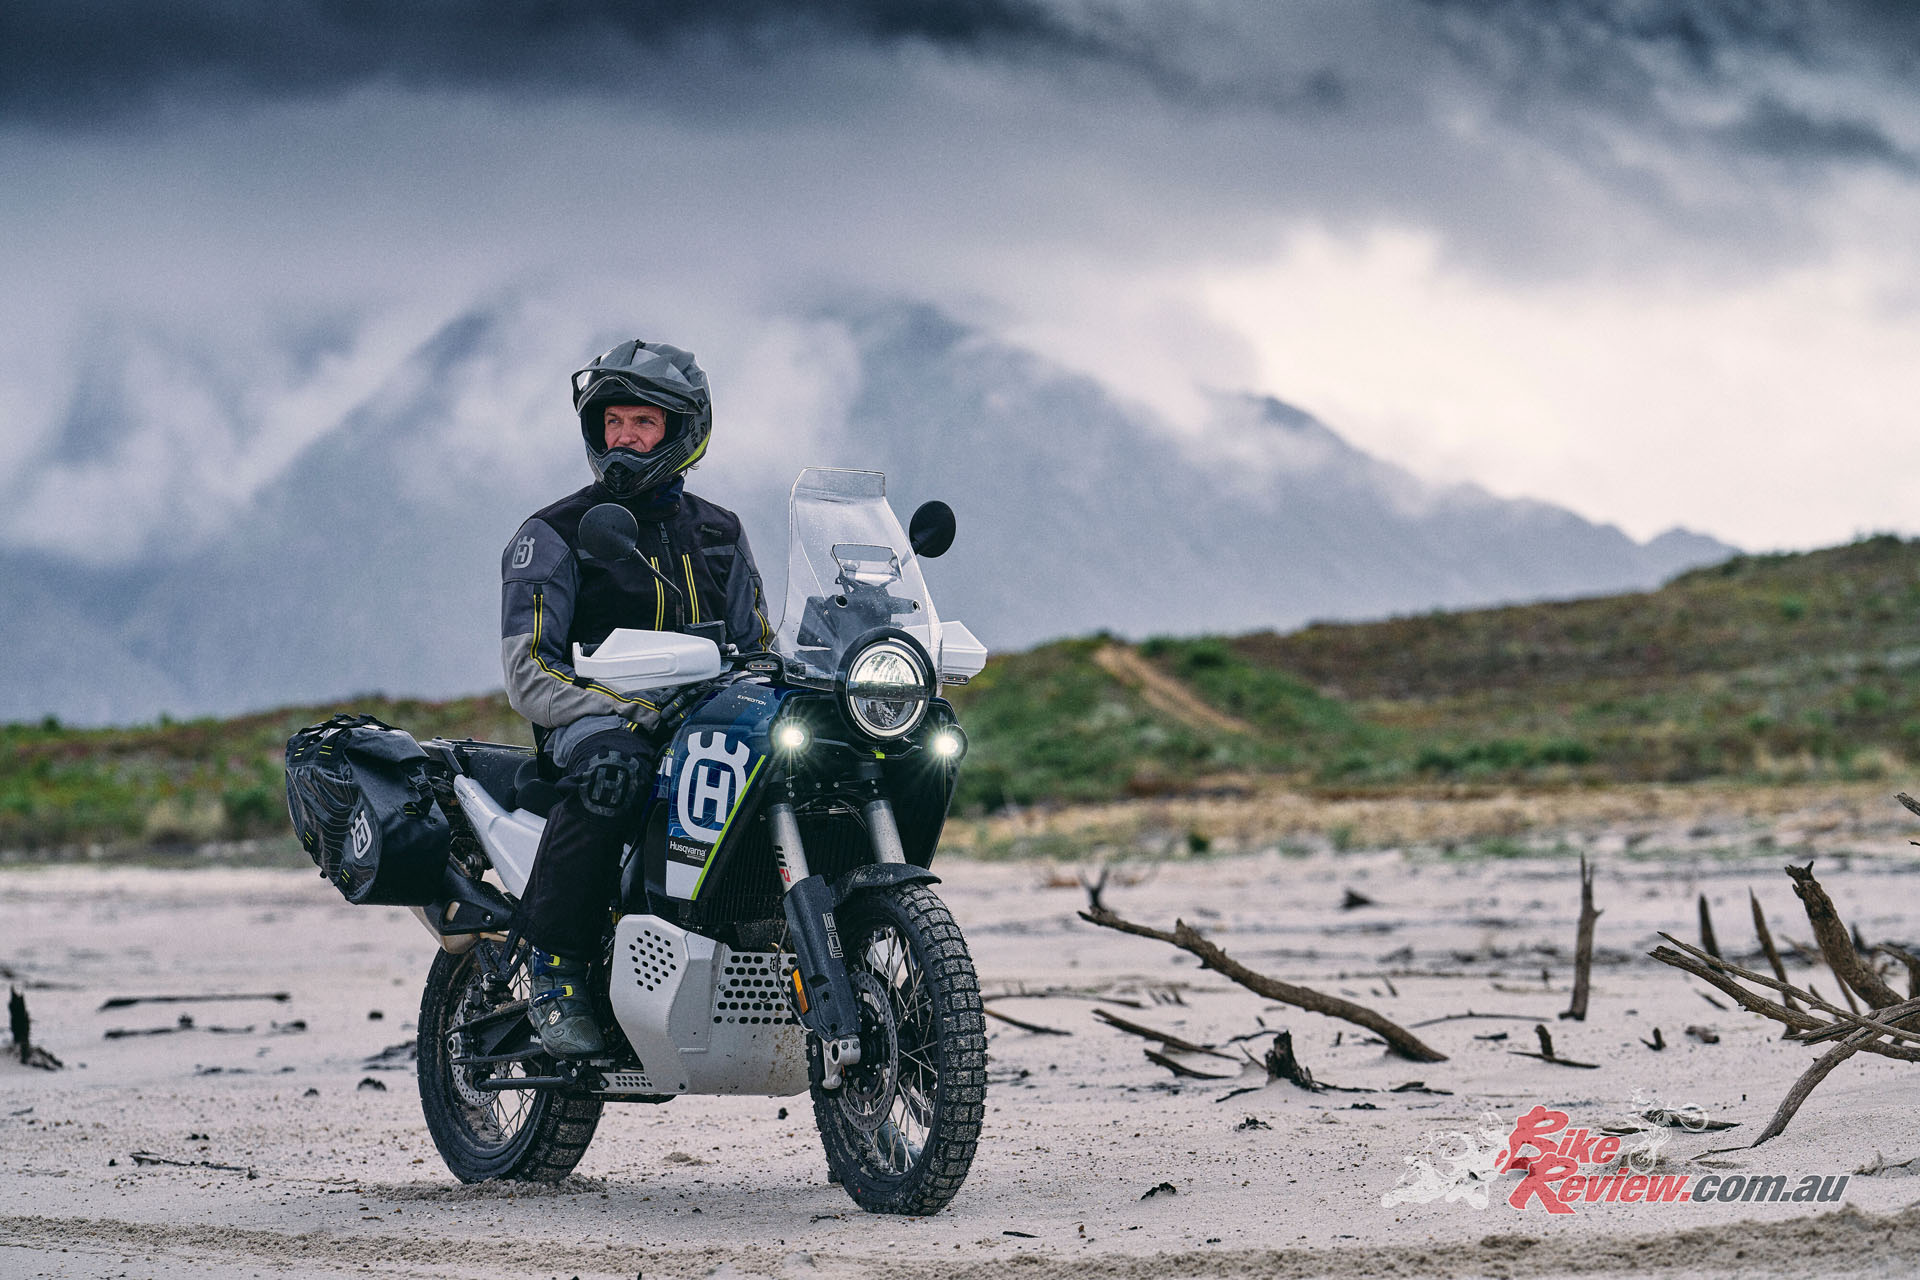 Not an off-road rider? No worries! Husqvarna have added plenty of features for road tourers.